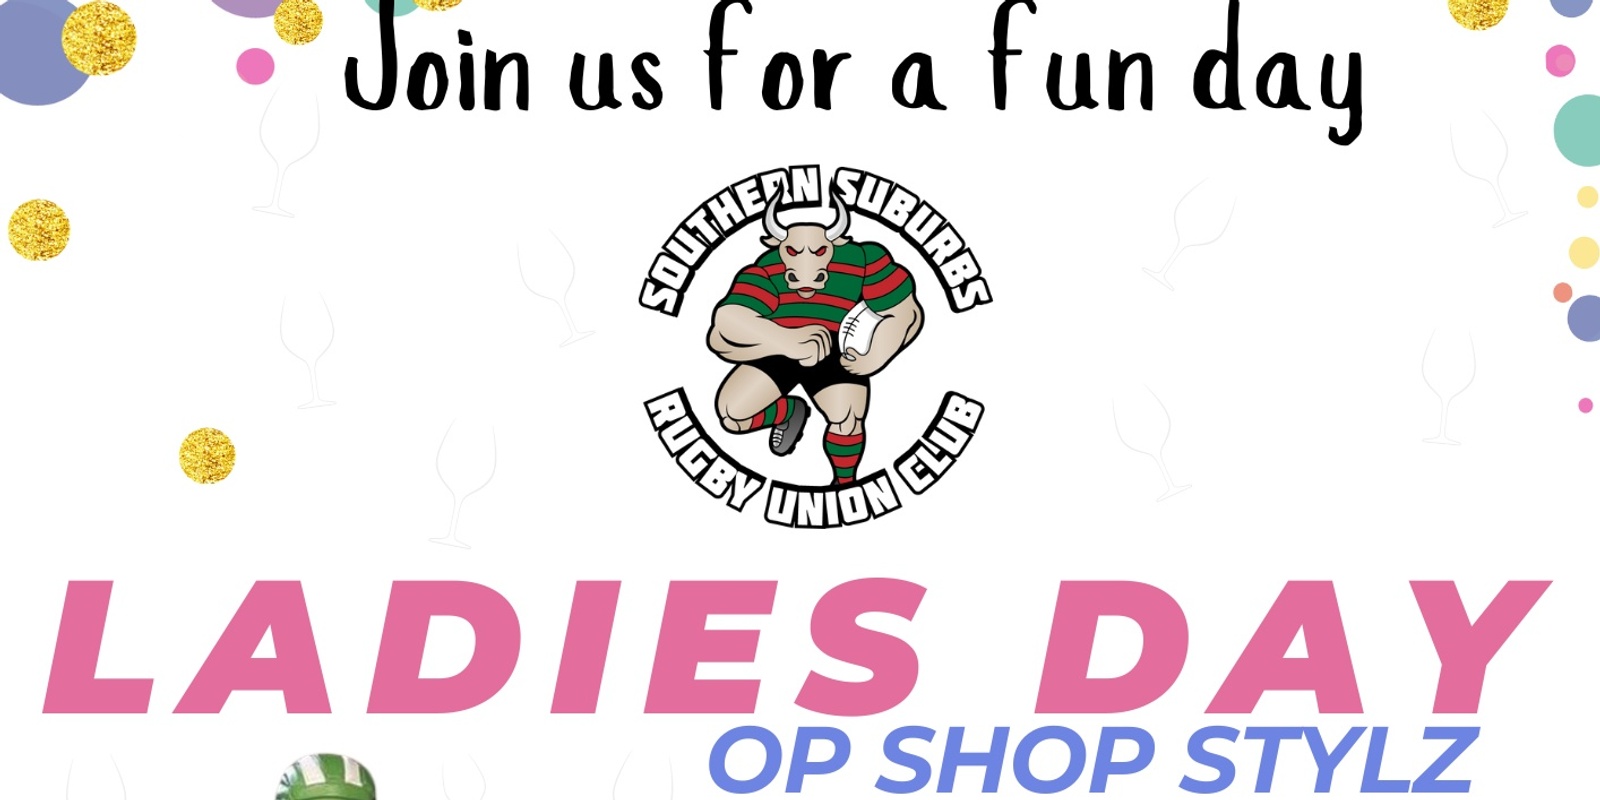 Banner image for Souths Rugby Ladies Day 